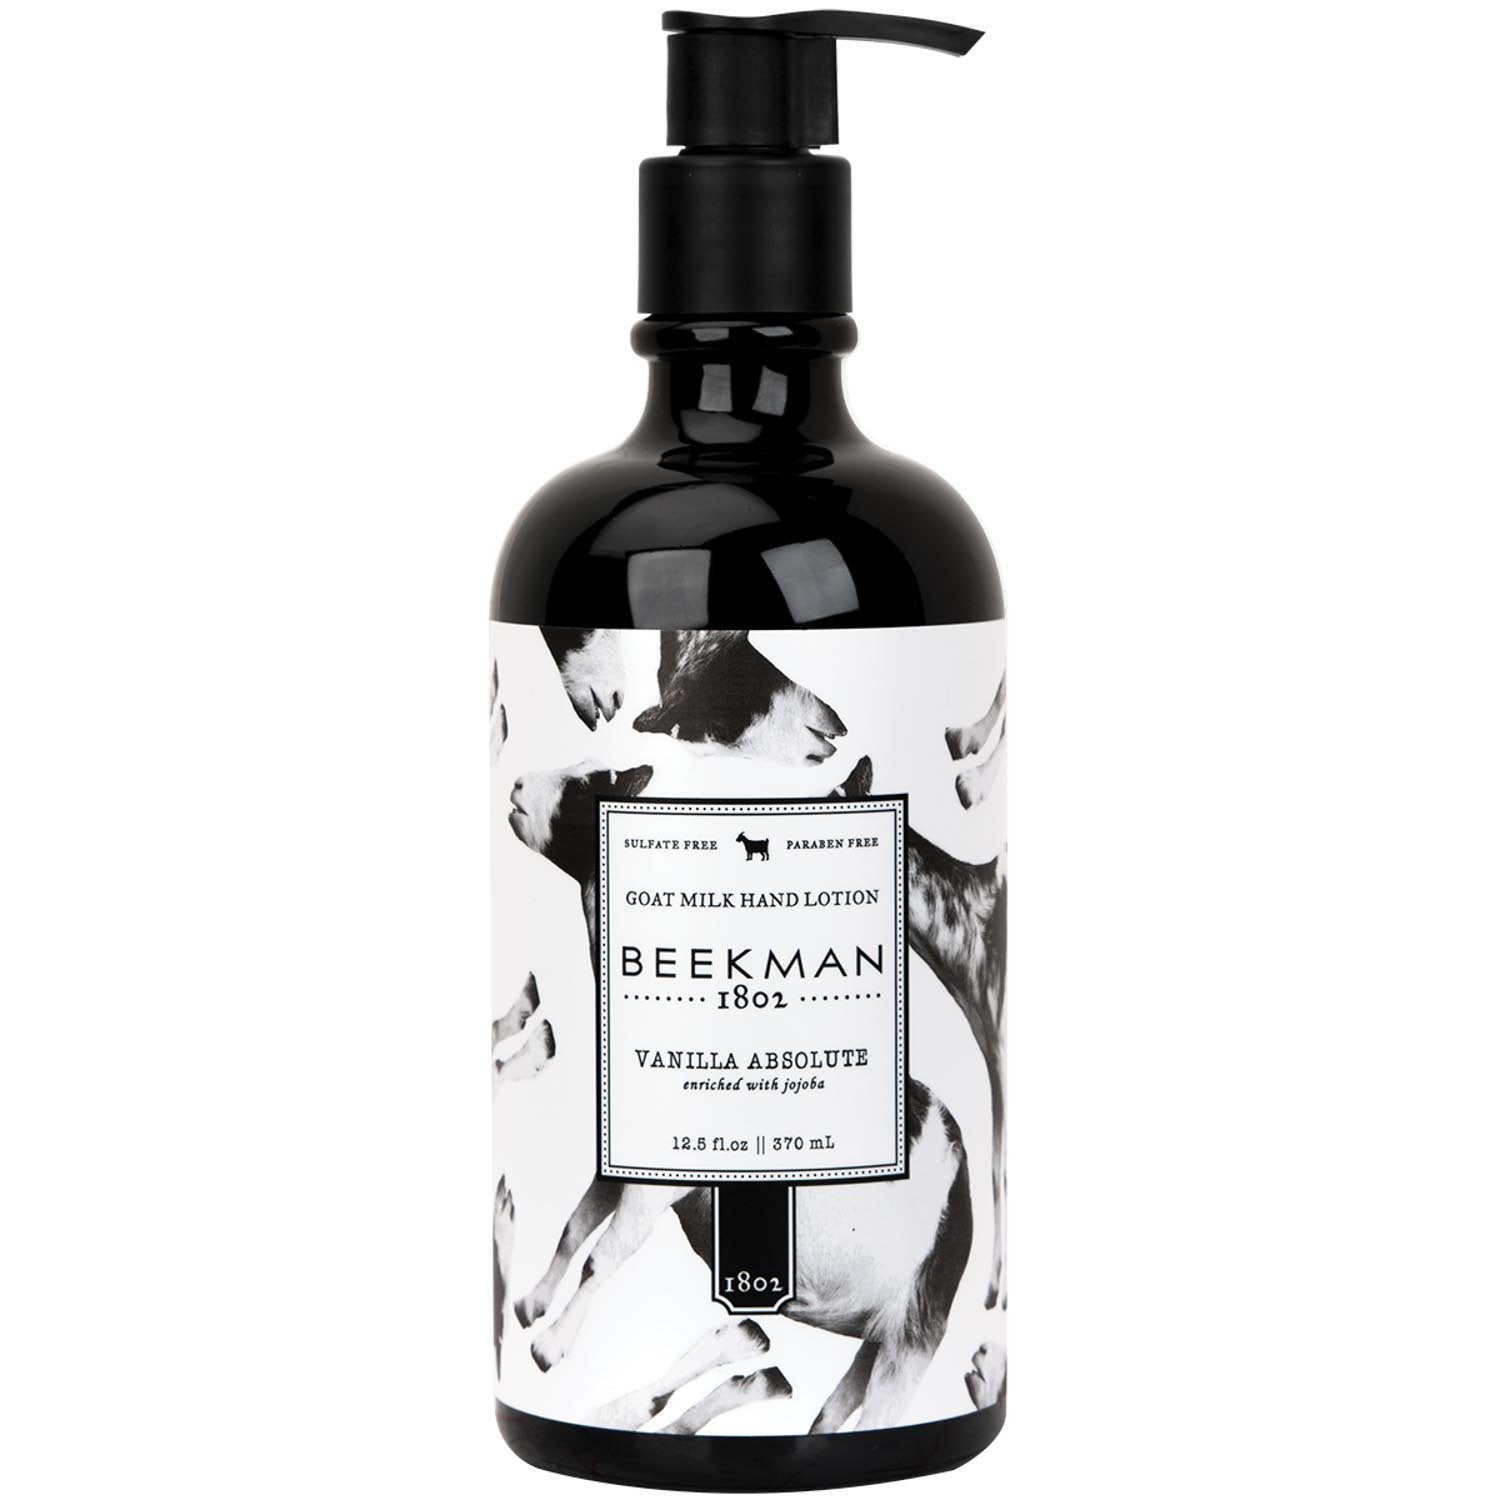 Beekman 1802 Vanilla Absolute Goat Milk Hand Lotion - 12.5 Fluid Ounces - The Finished Room